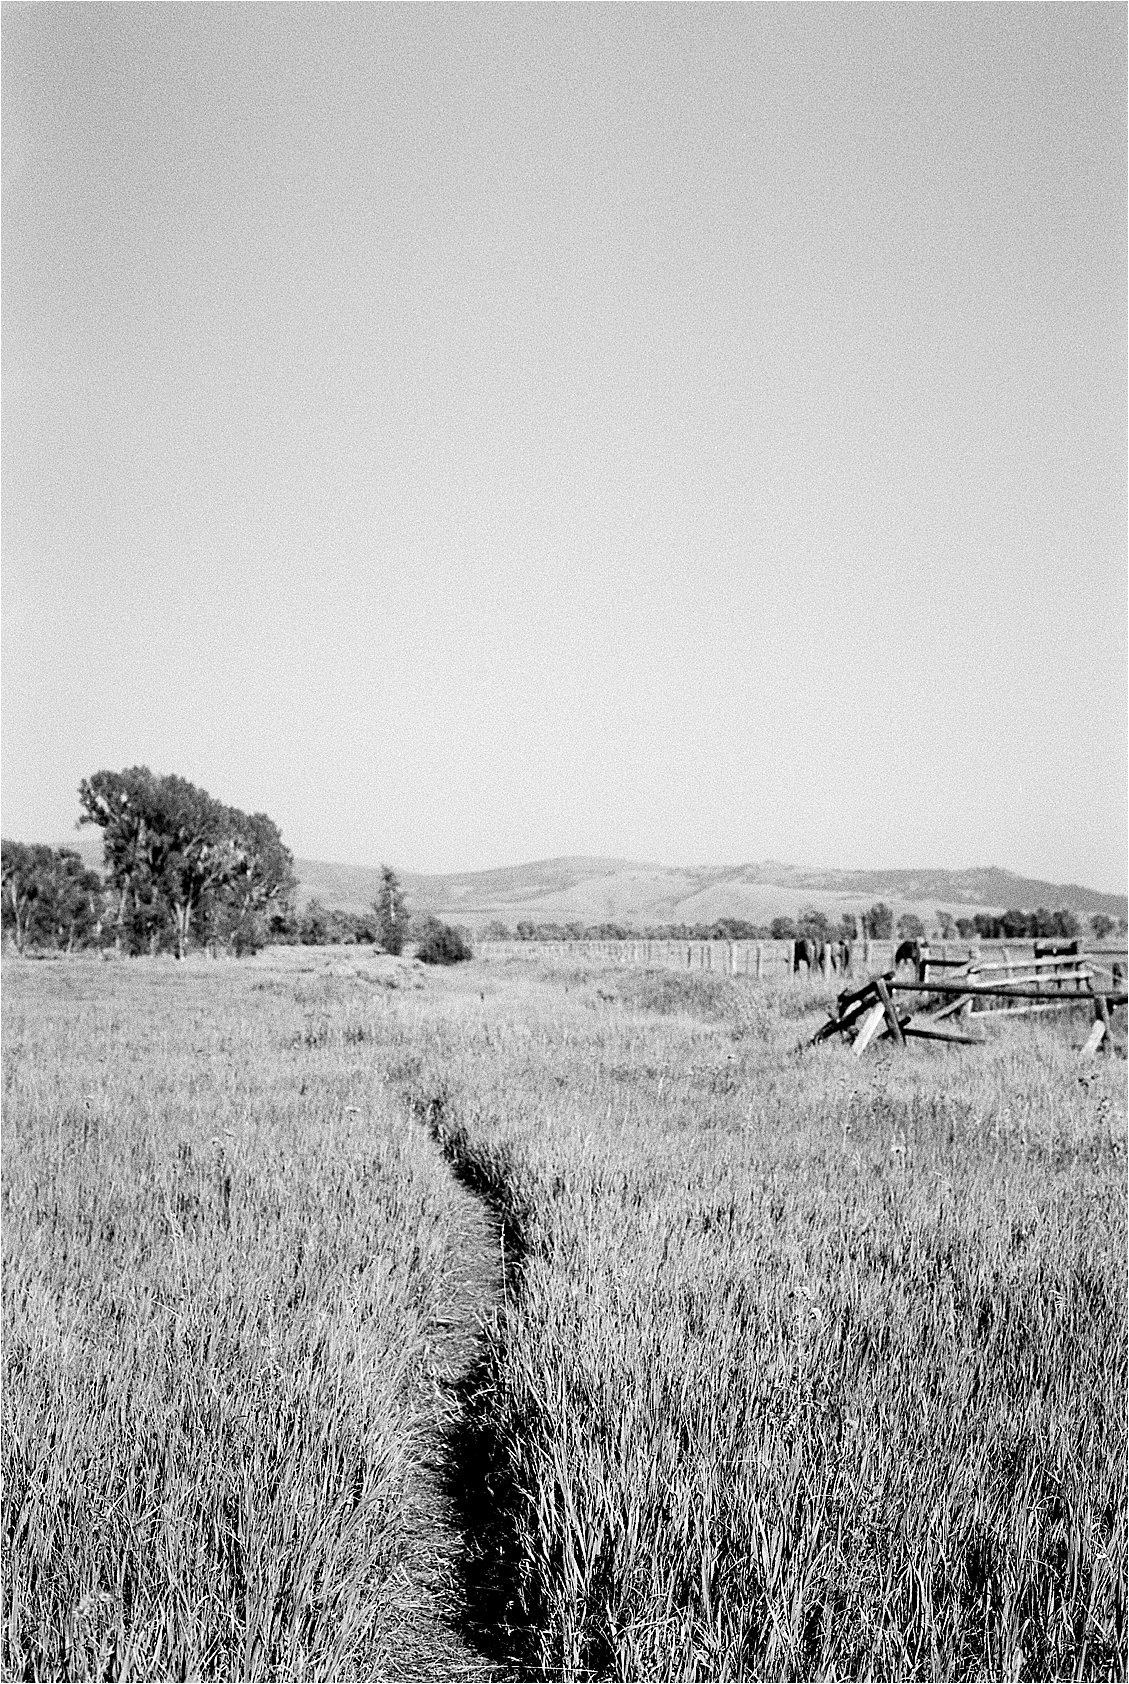 Mormon Row in Grand Teton National Park photographed on black and white film by Renee Hollingshead